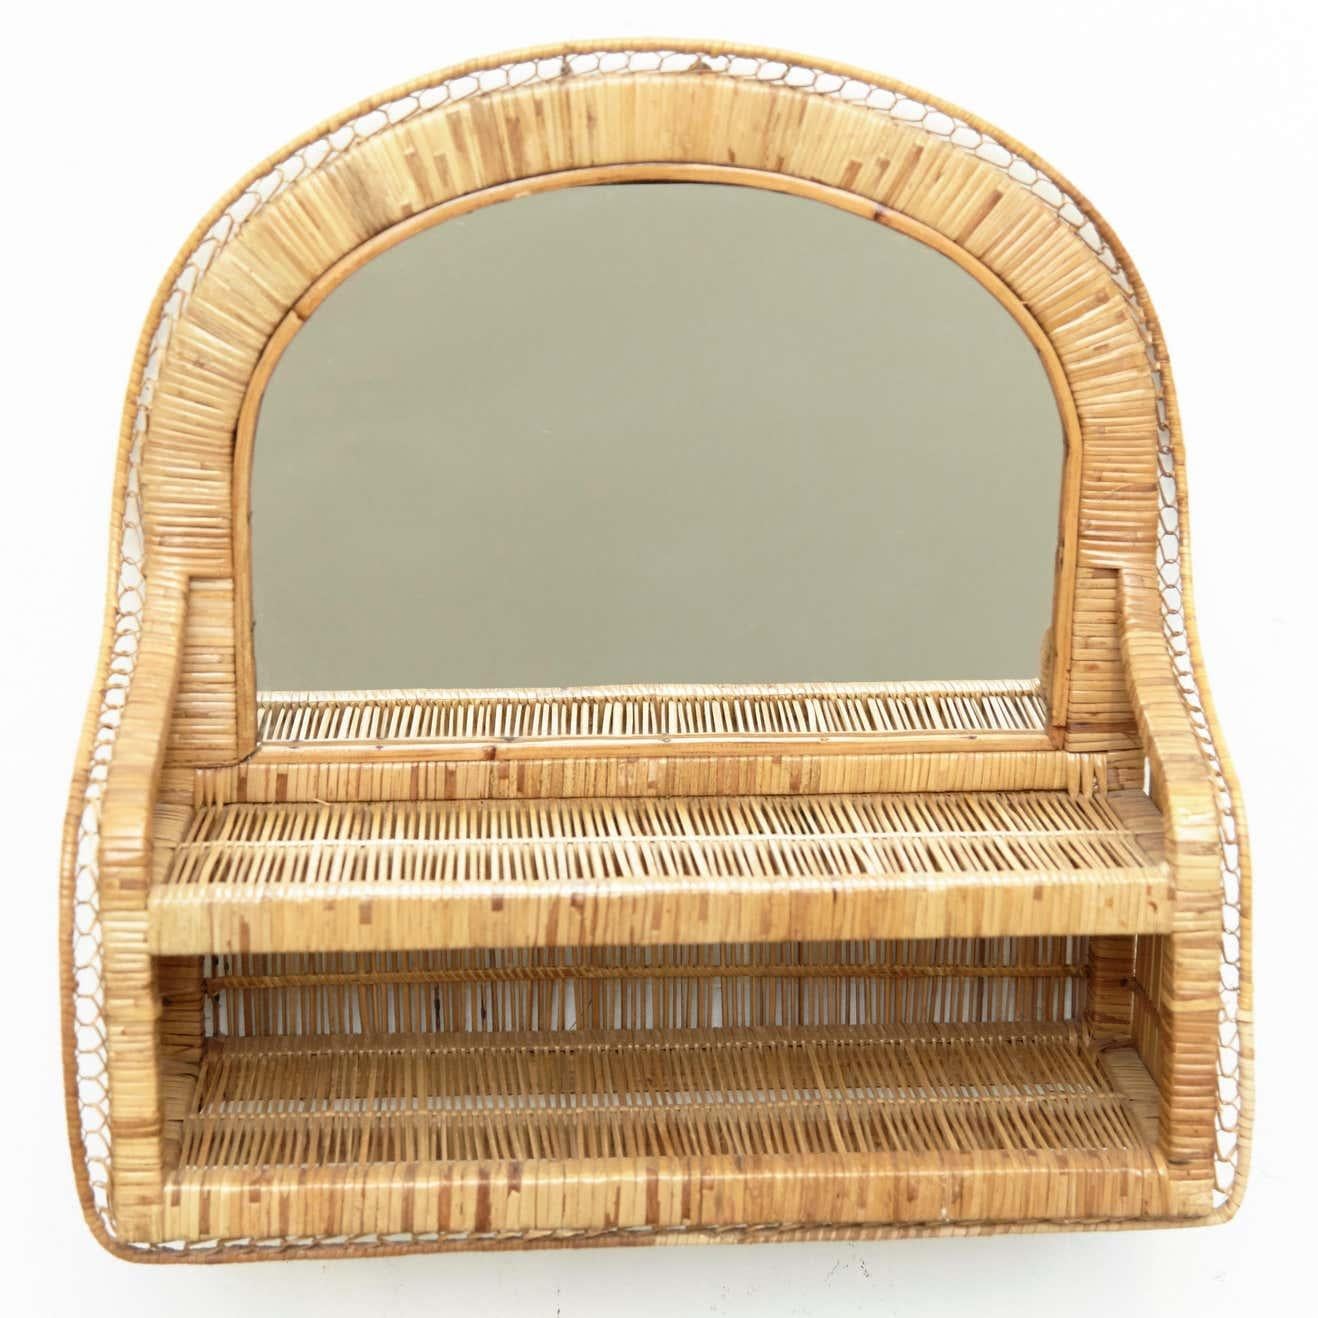 Introducing a timeless piece of Mid-Century Modern design, this handcrafted rattan mirror embodies the essence of the era. Created circa 1960, this mirror showcases the artistry and craftsmanship of an unknown designer, highlighting the beauty of